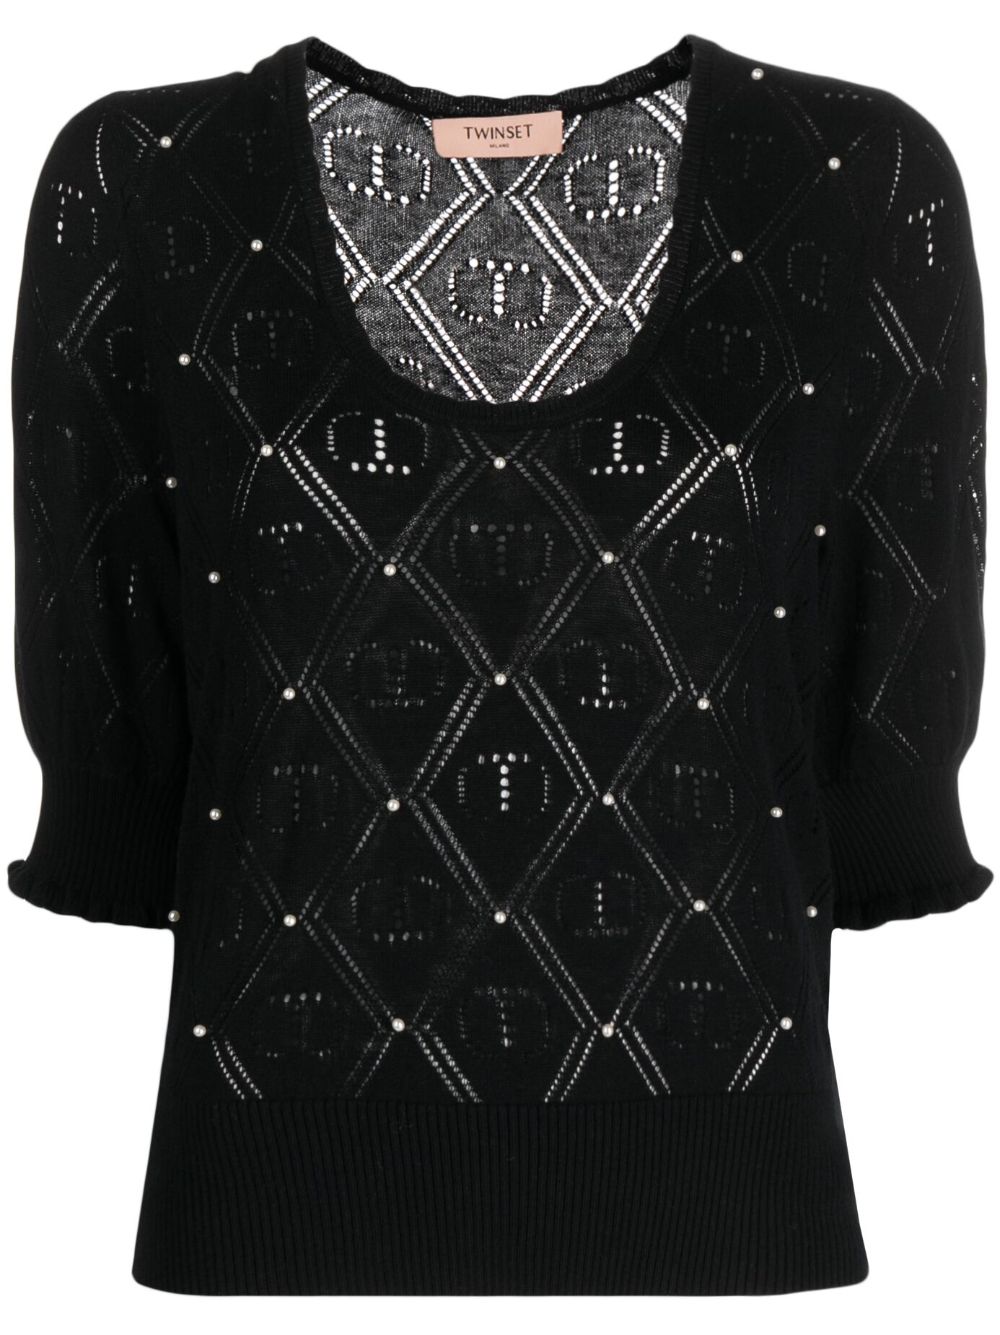 TWINSET embellished pointelle-knit top - Black